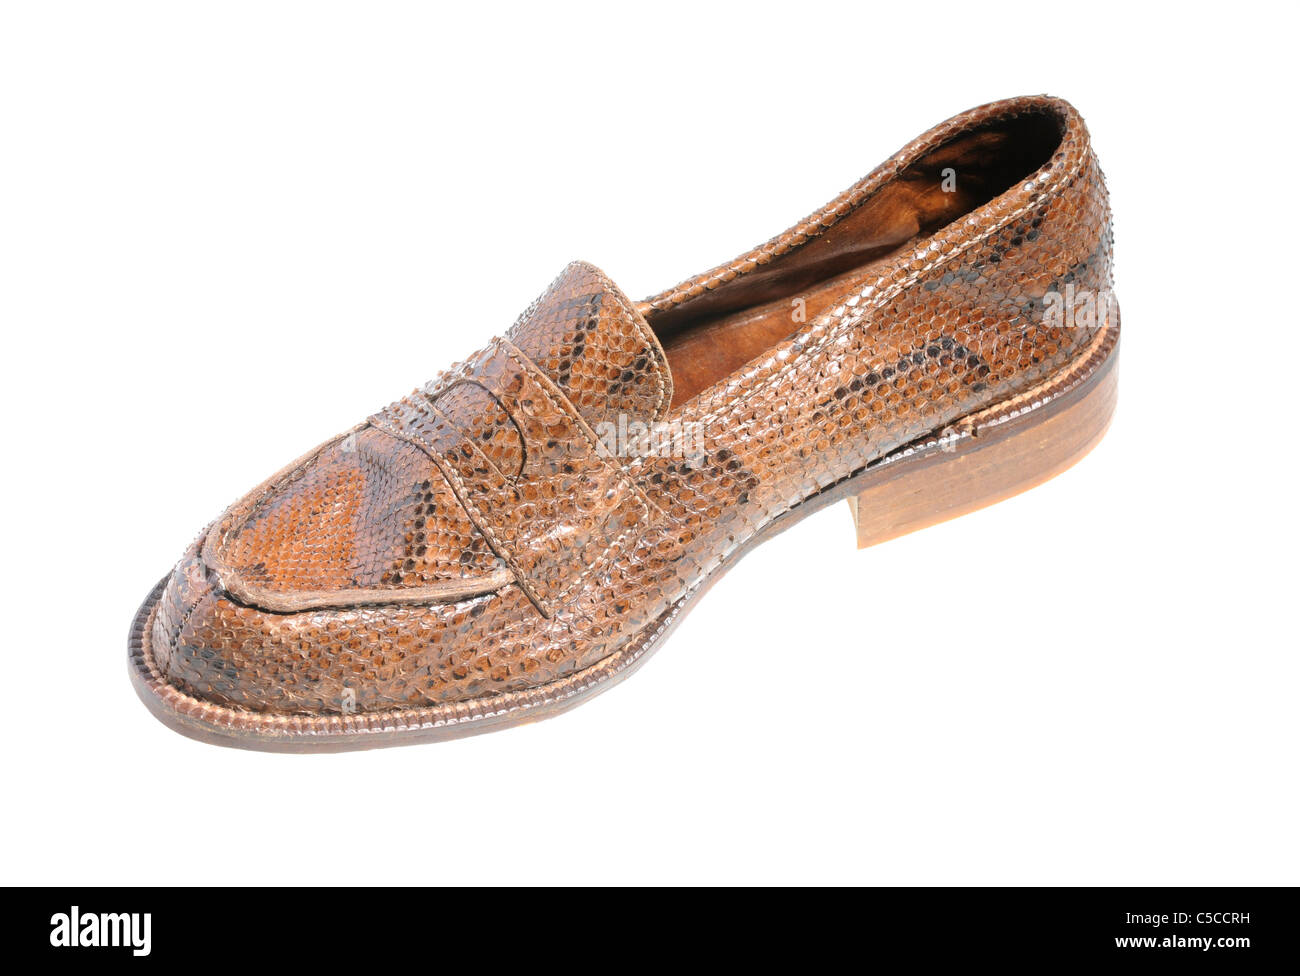 illegal endangered species product from CITES list - African rock python (Python sebae) snake leather shoe Stock Photo